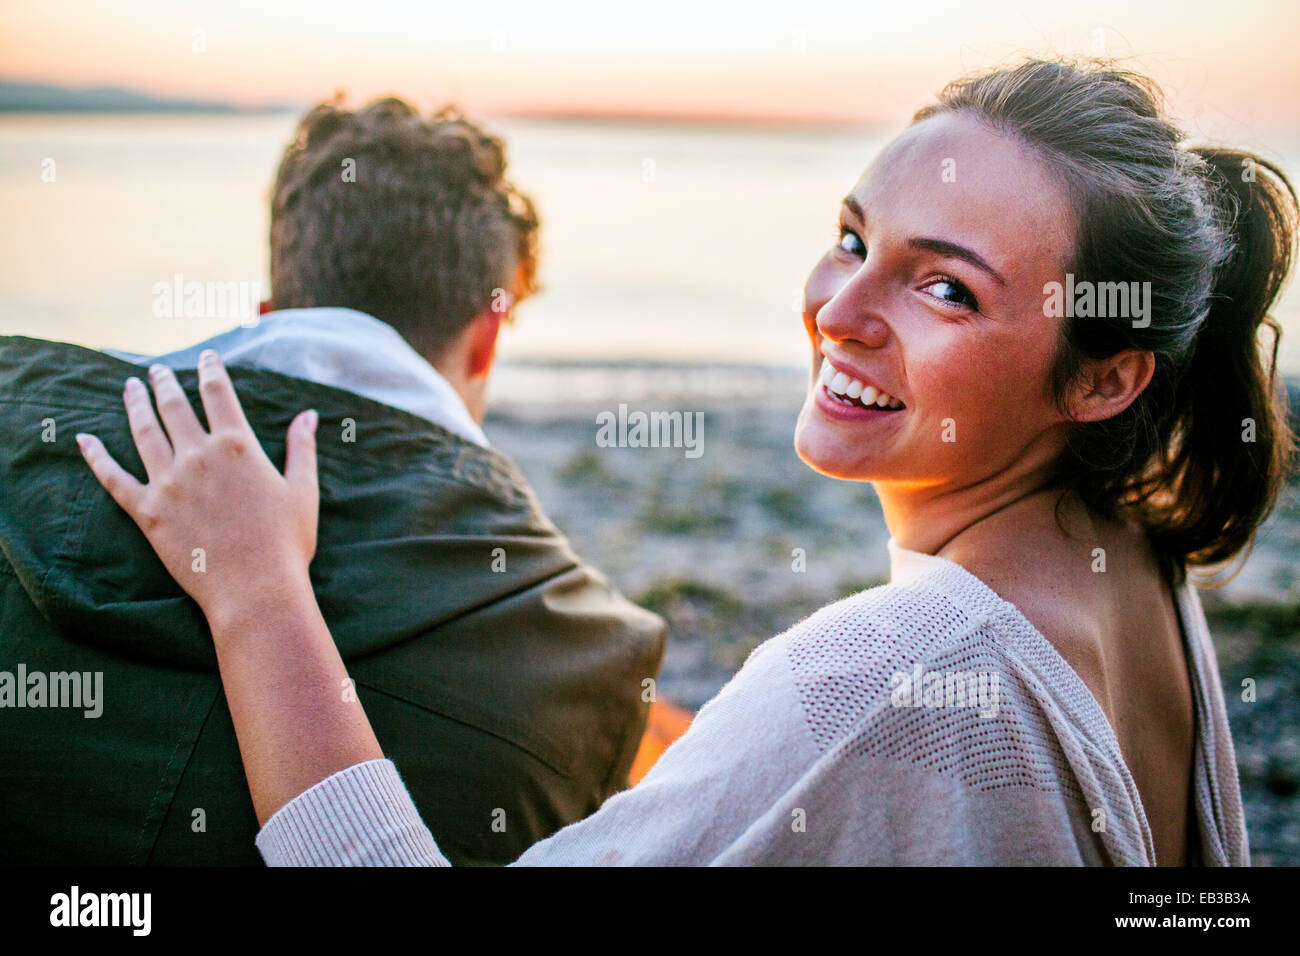 Young woman relaxing with boyfriend on beach Banque D'Images